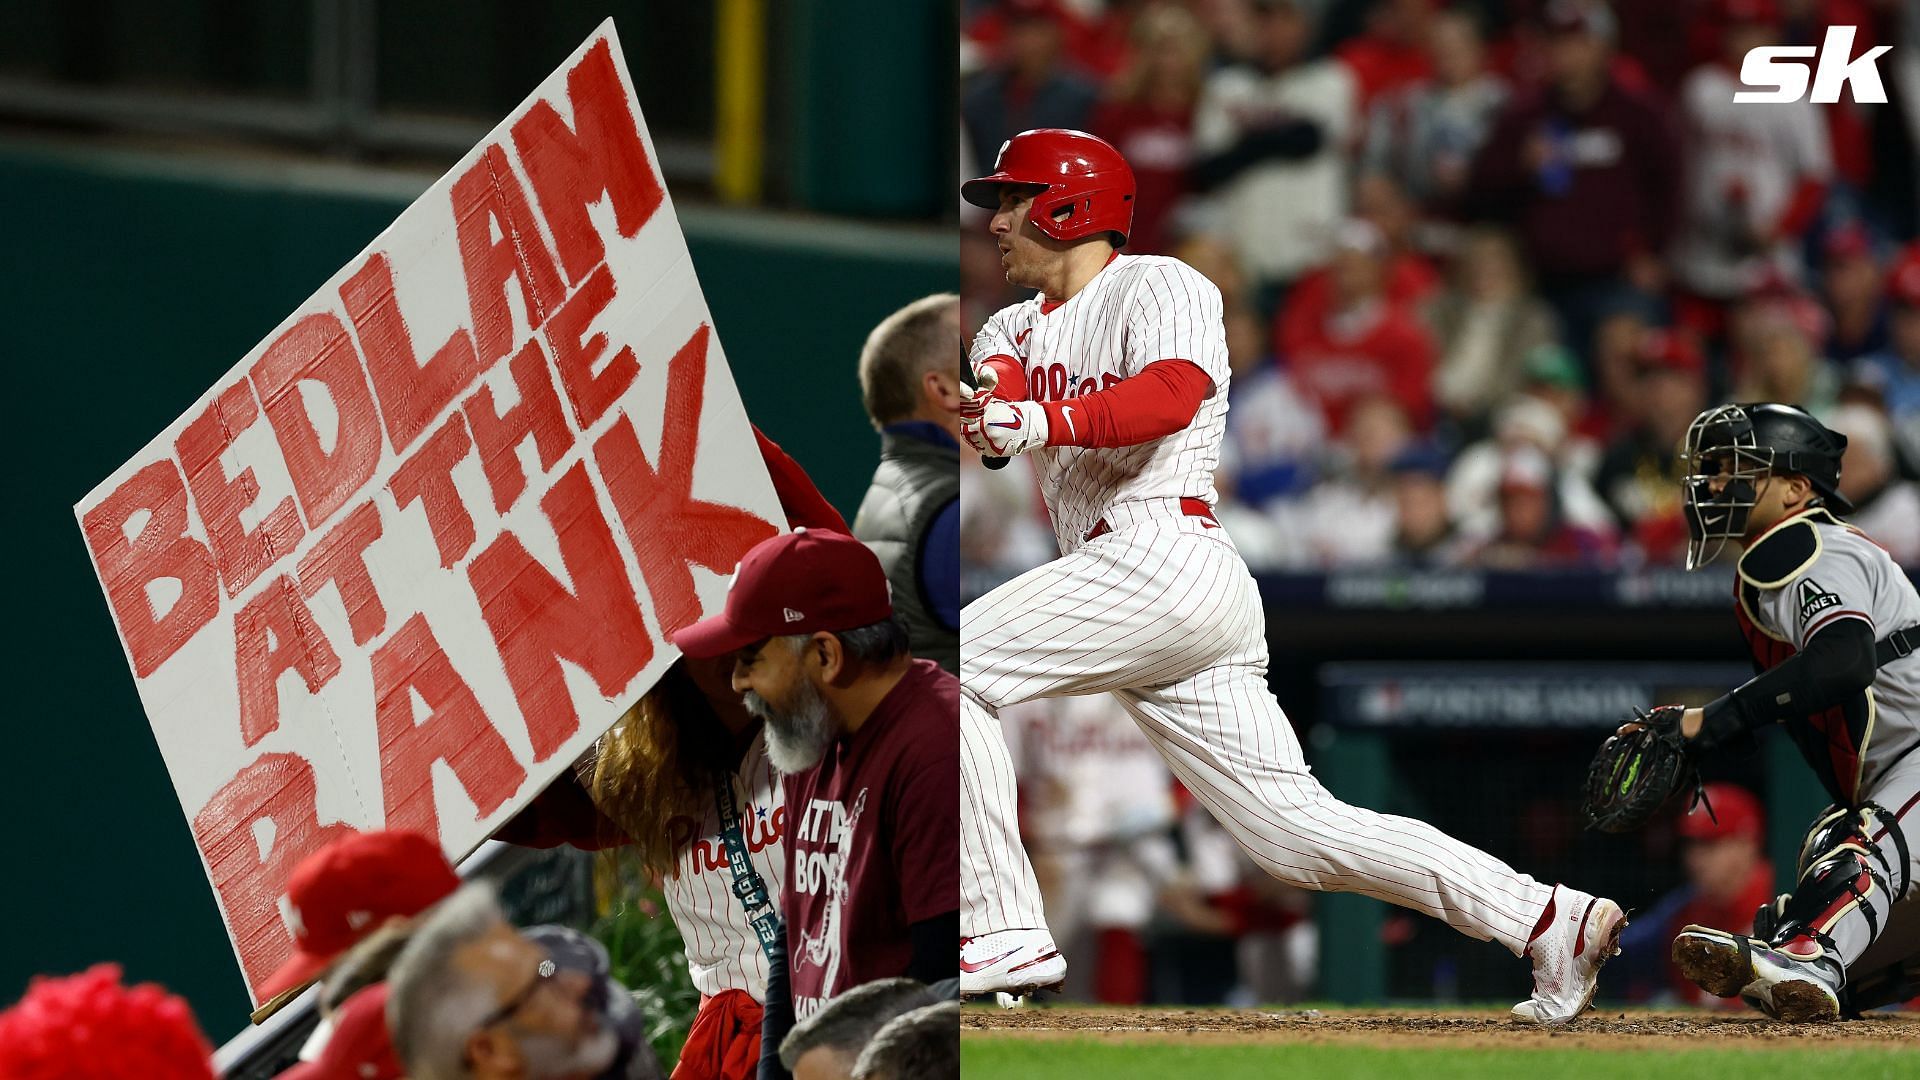 MLB fans react to electric atmosphere at Citizens Bank Park for NLCS opener. 